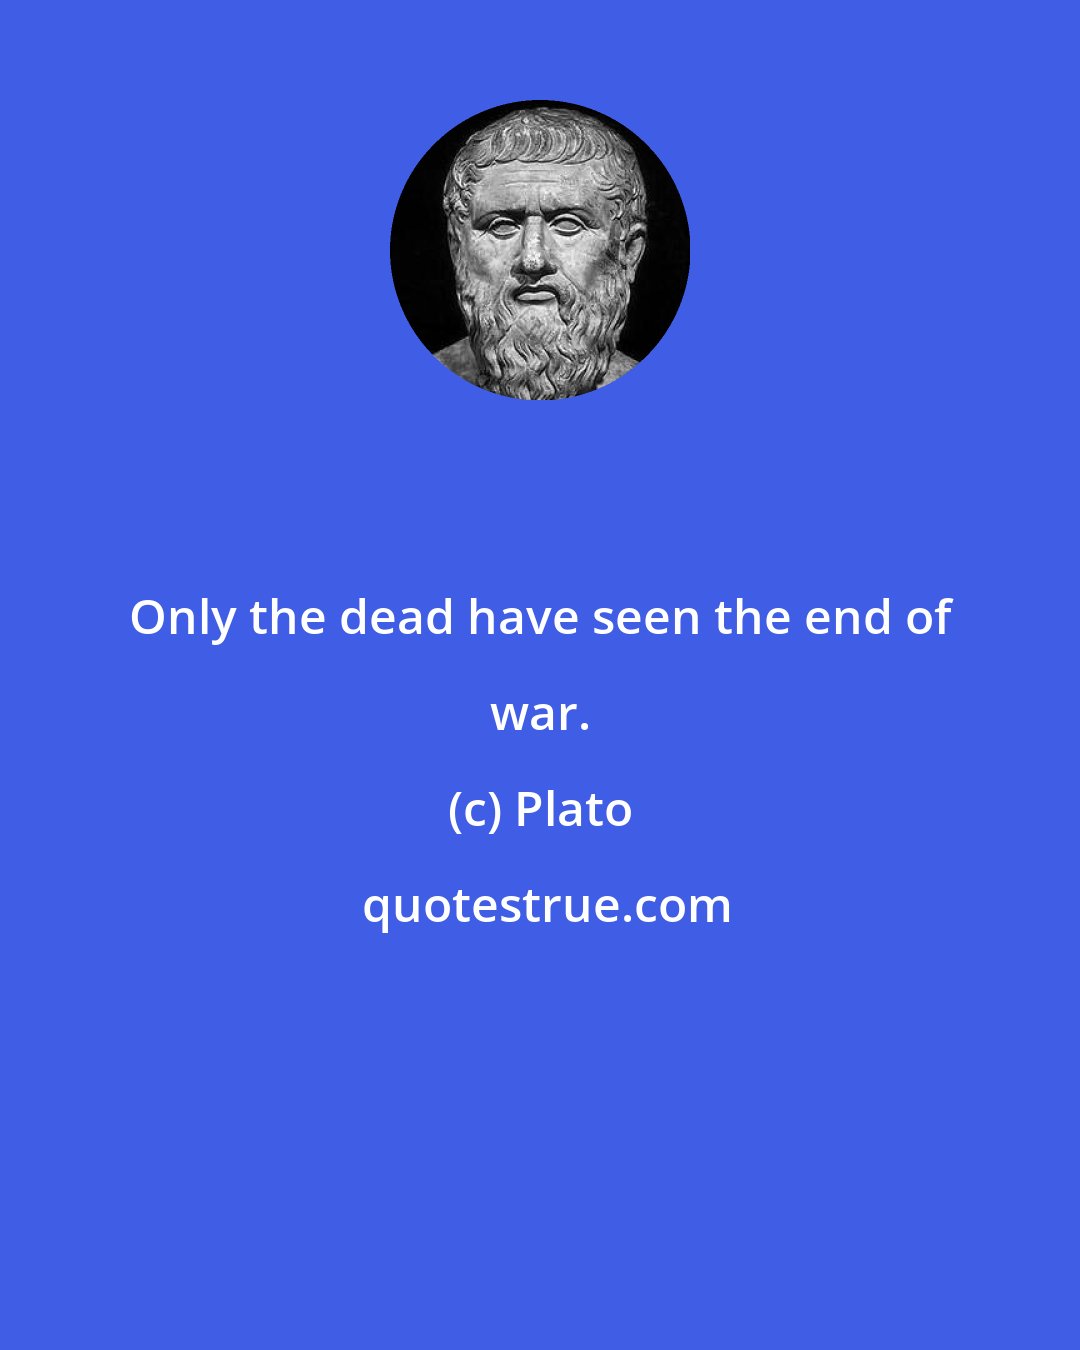 Plato: Only the dead have seen the end of war.